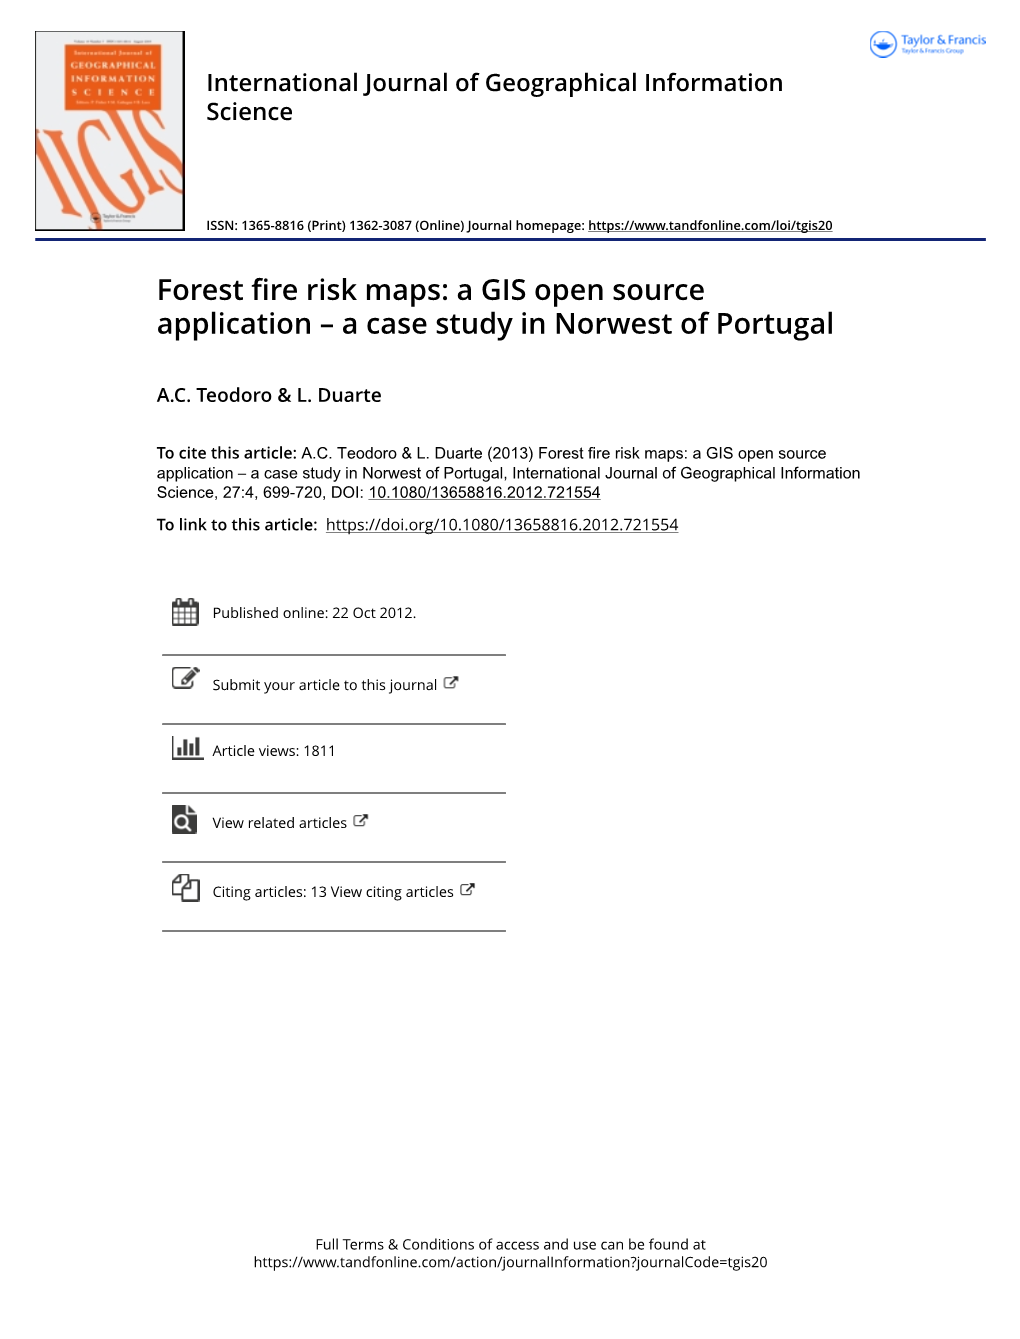 Forest Fire Risk Maps: a GIS Open Source Application – a Case Study in Norwest of Portugal